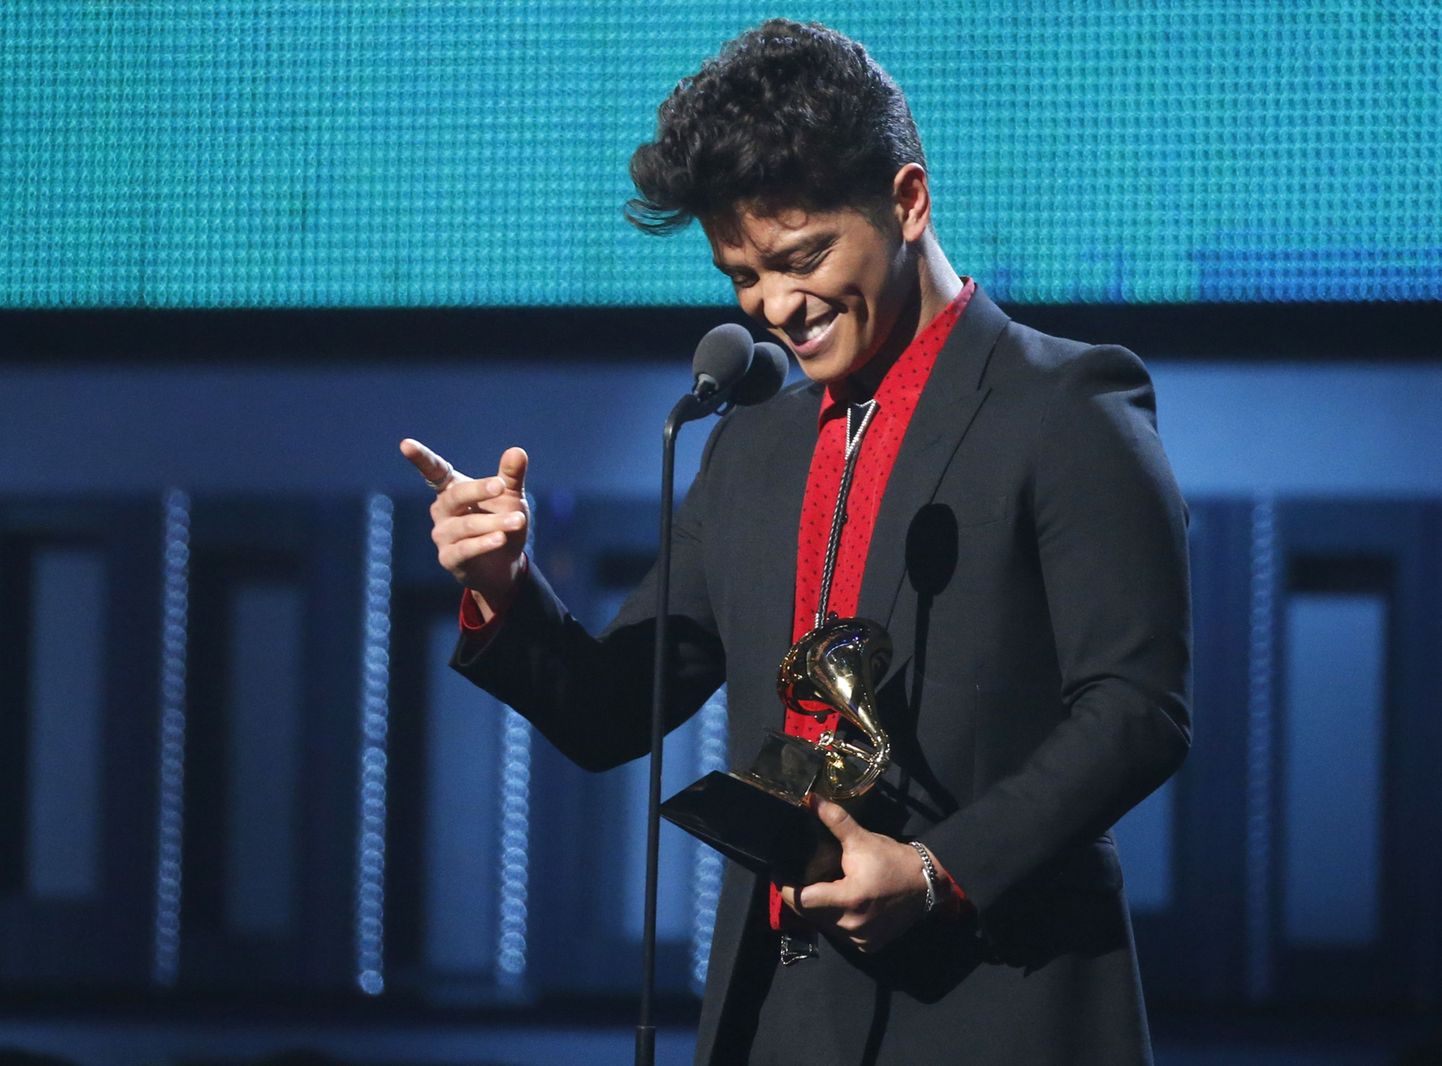 Bruno Mars accepts the award for Best Pop Vocal Album for "Unorthodox Jukebox" at the 56th annual Grammy Awards in Los Angeles, California January 26, 2014.    REUTERS/Mario Anzuoni (UNITED STATES  - Tags: ENTERTAINMENT)   (GRAMMYS-SHOW)